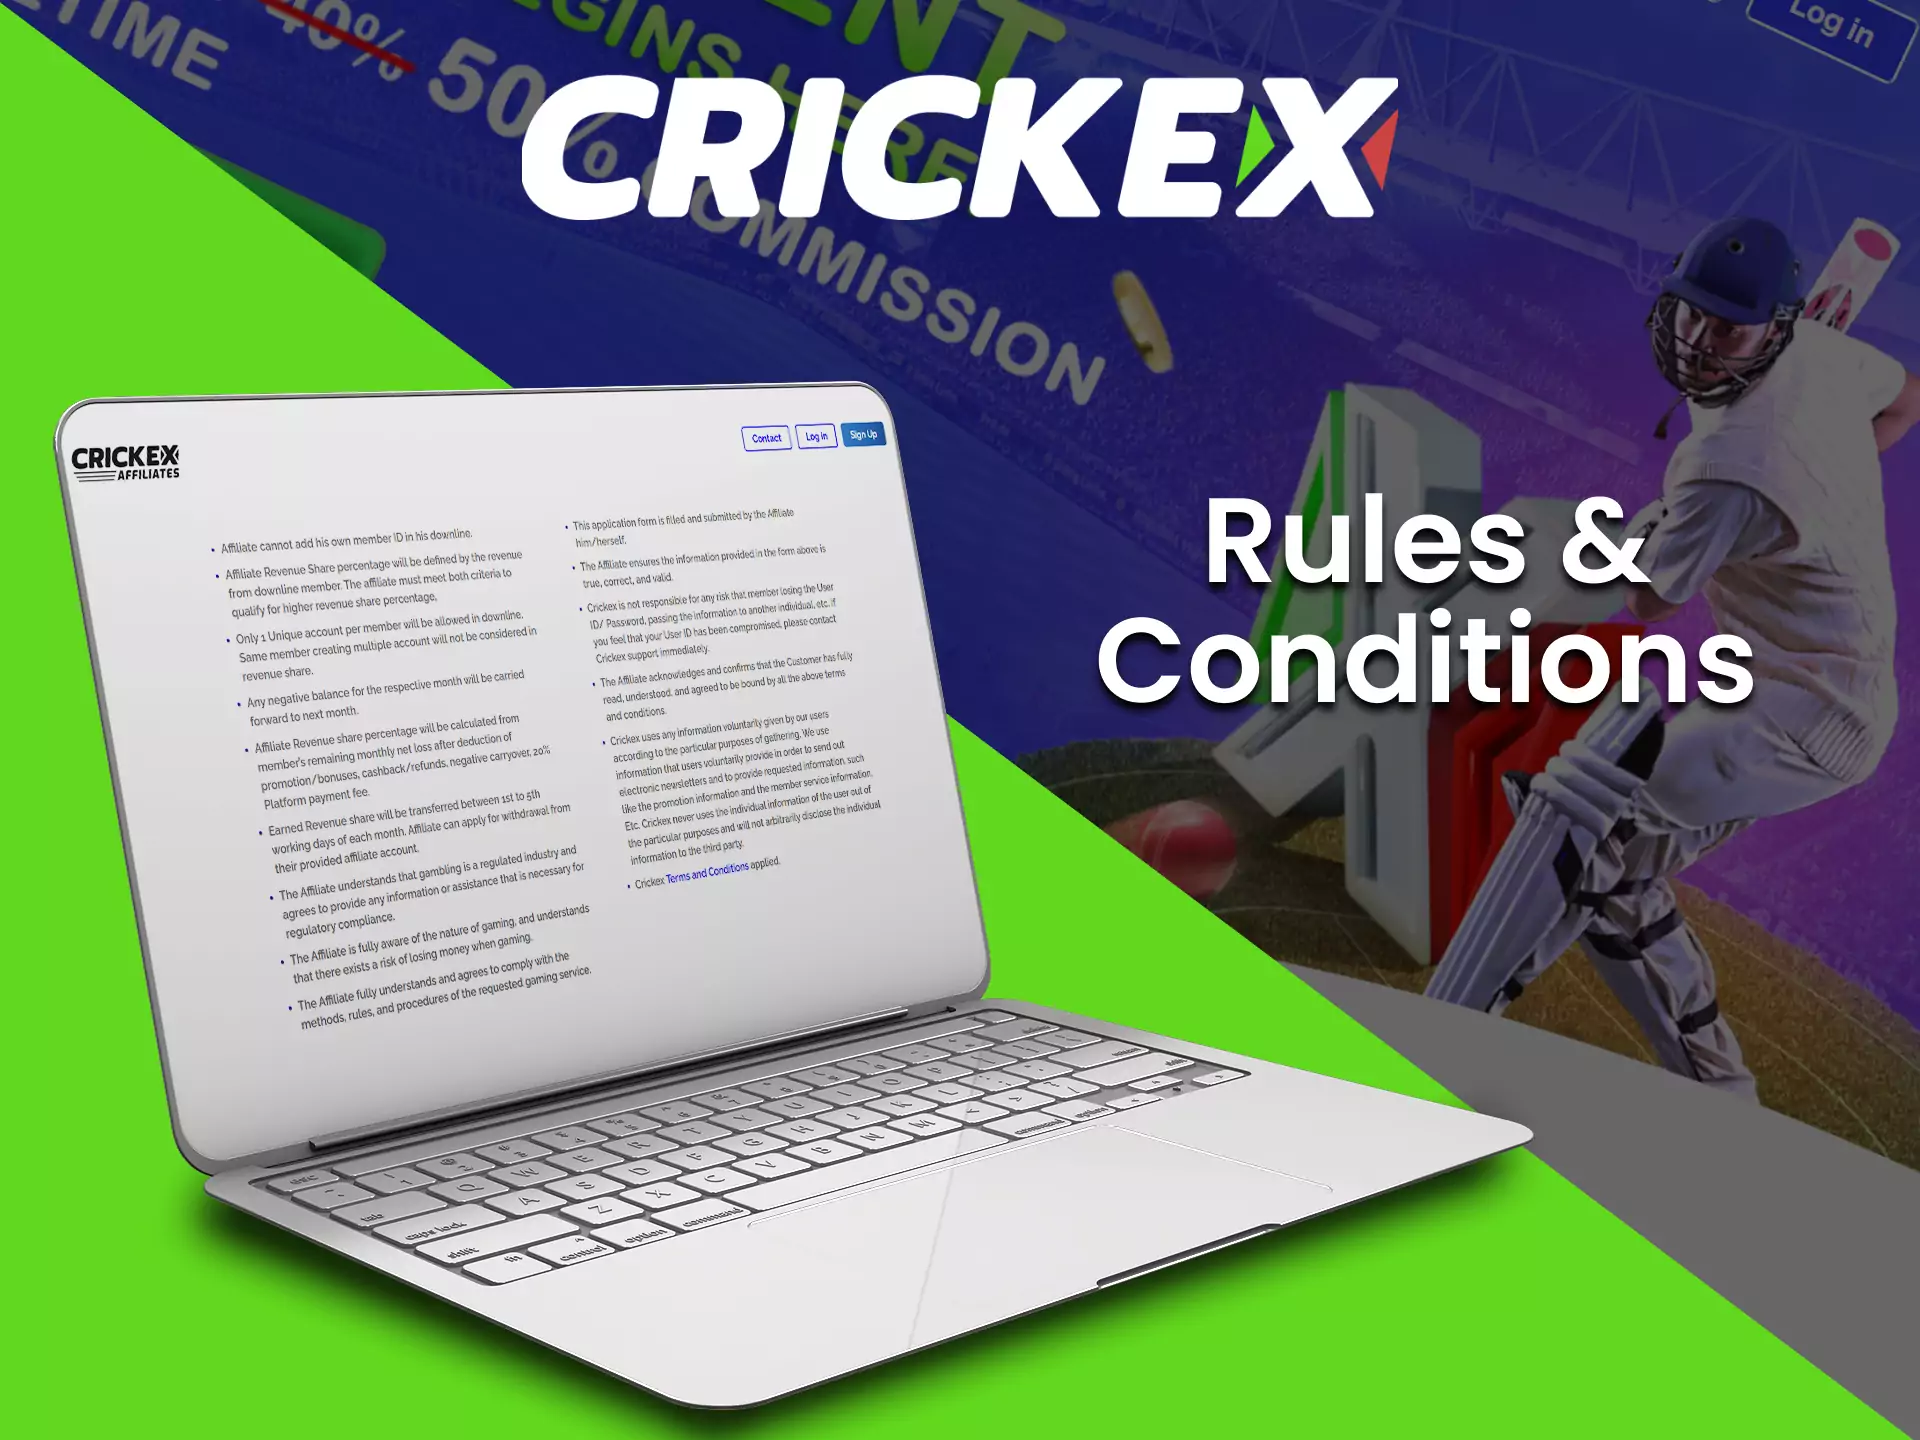 Follow the Crickex rules to become an affiliate.